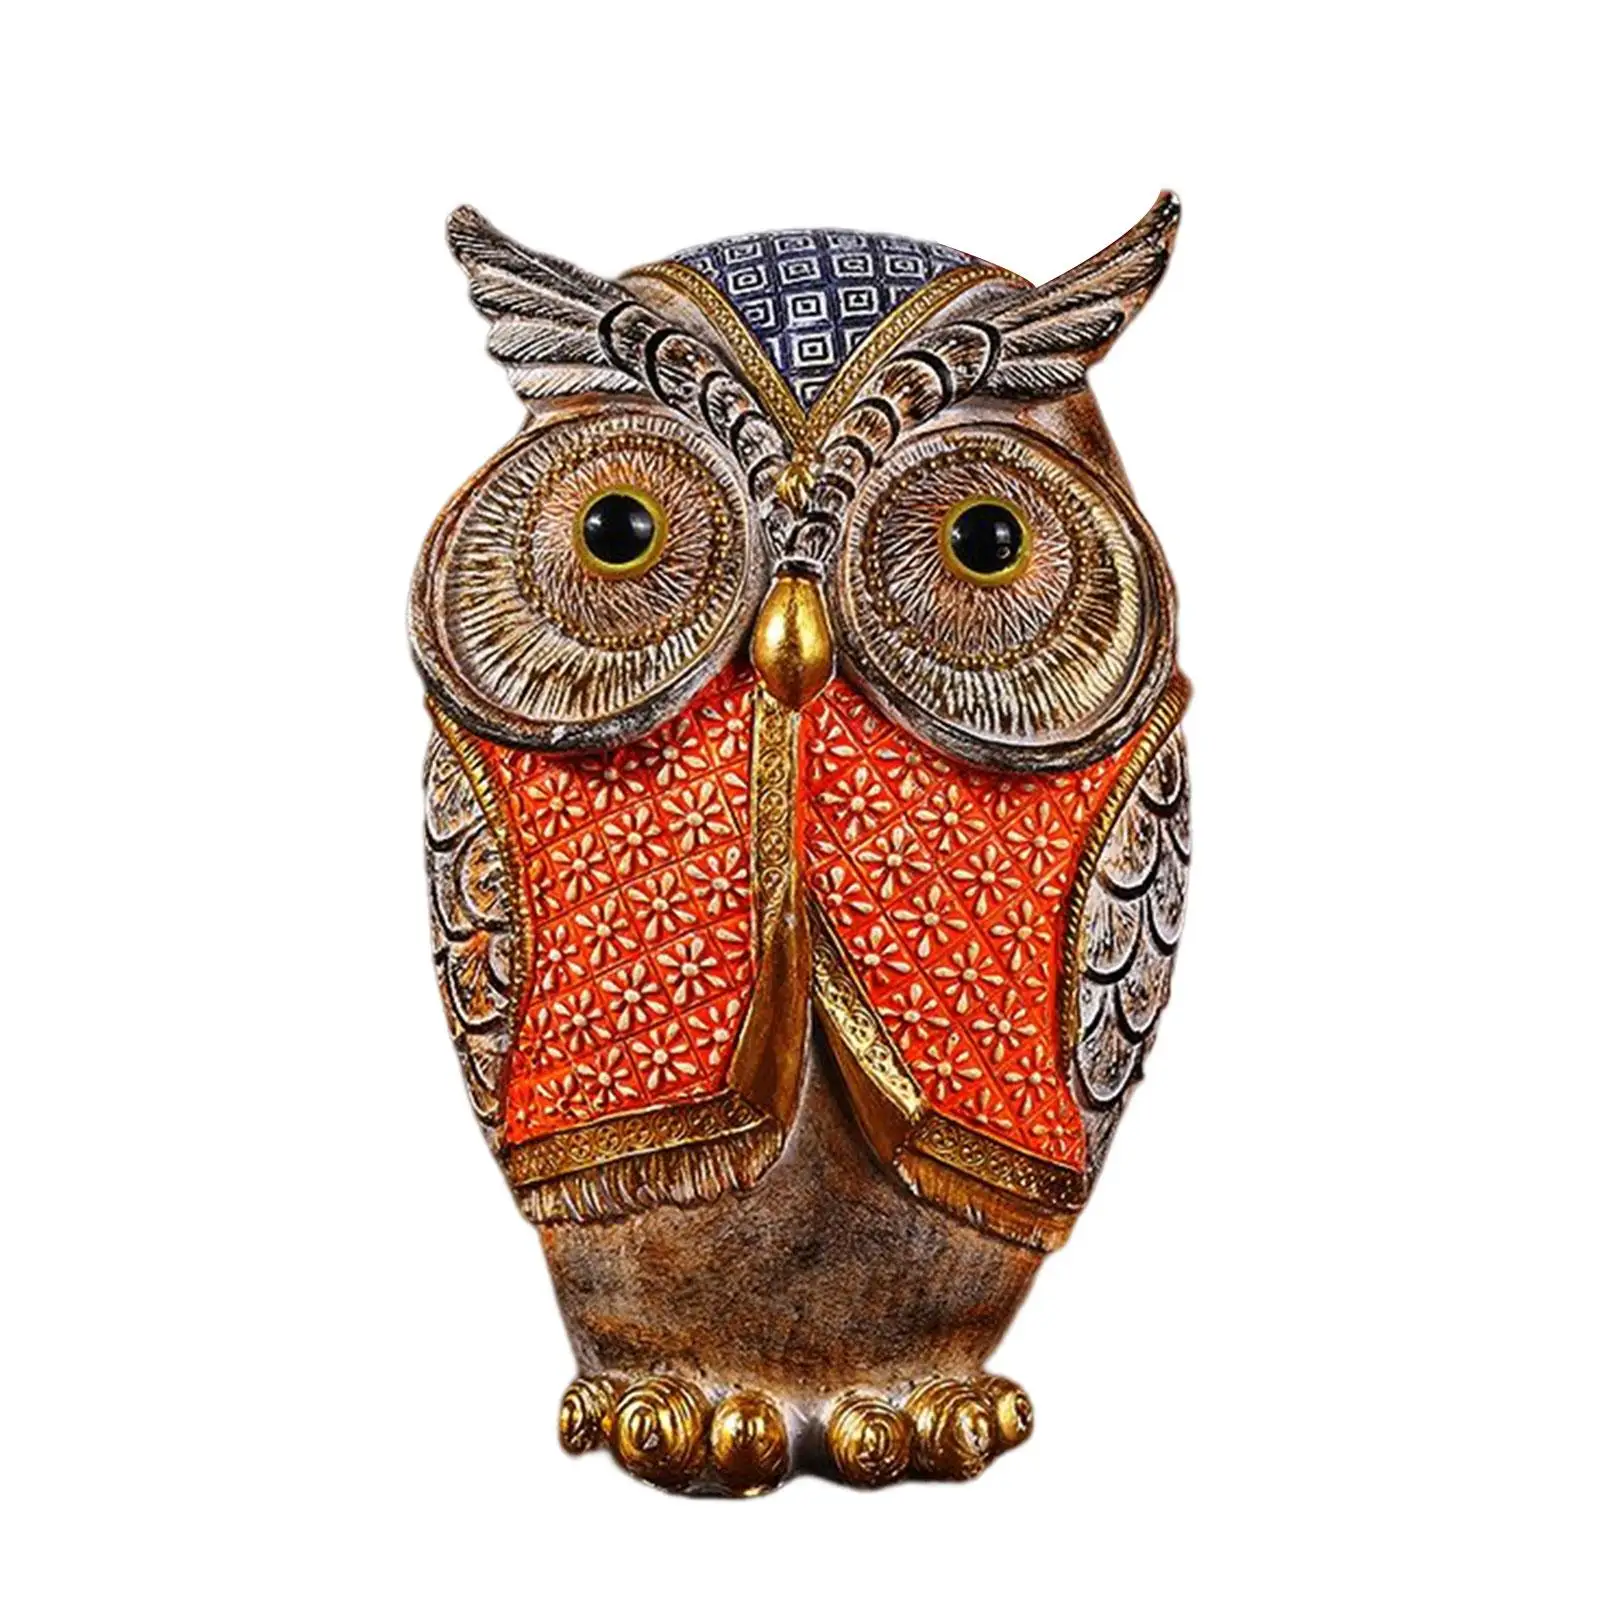 European owl Statue Gifts resin Ornament Realistic Crafts Decor Animal Statue for Home Bathroom Car Office Living Room